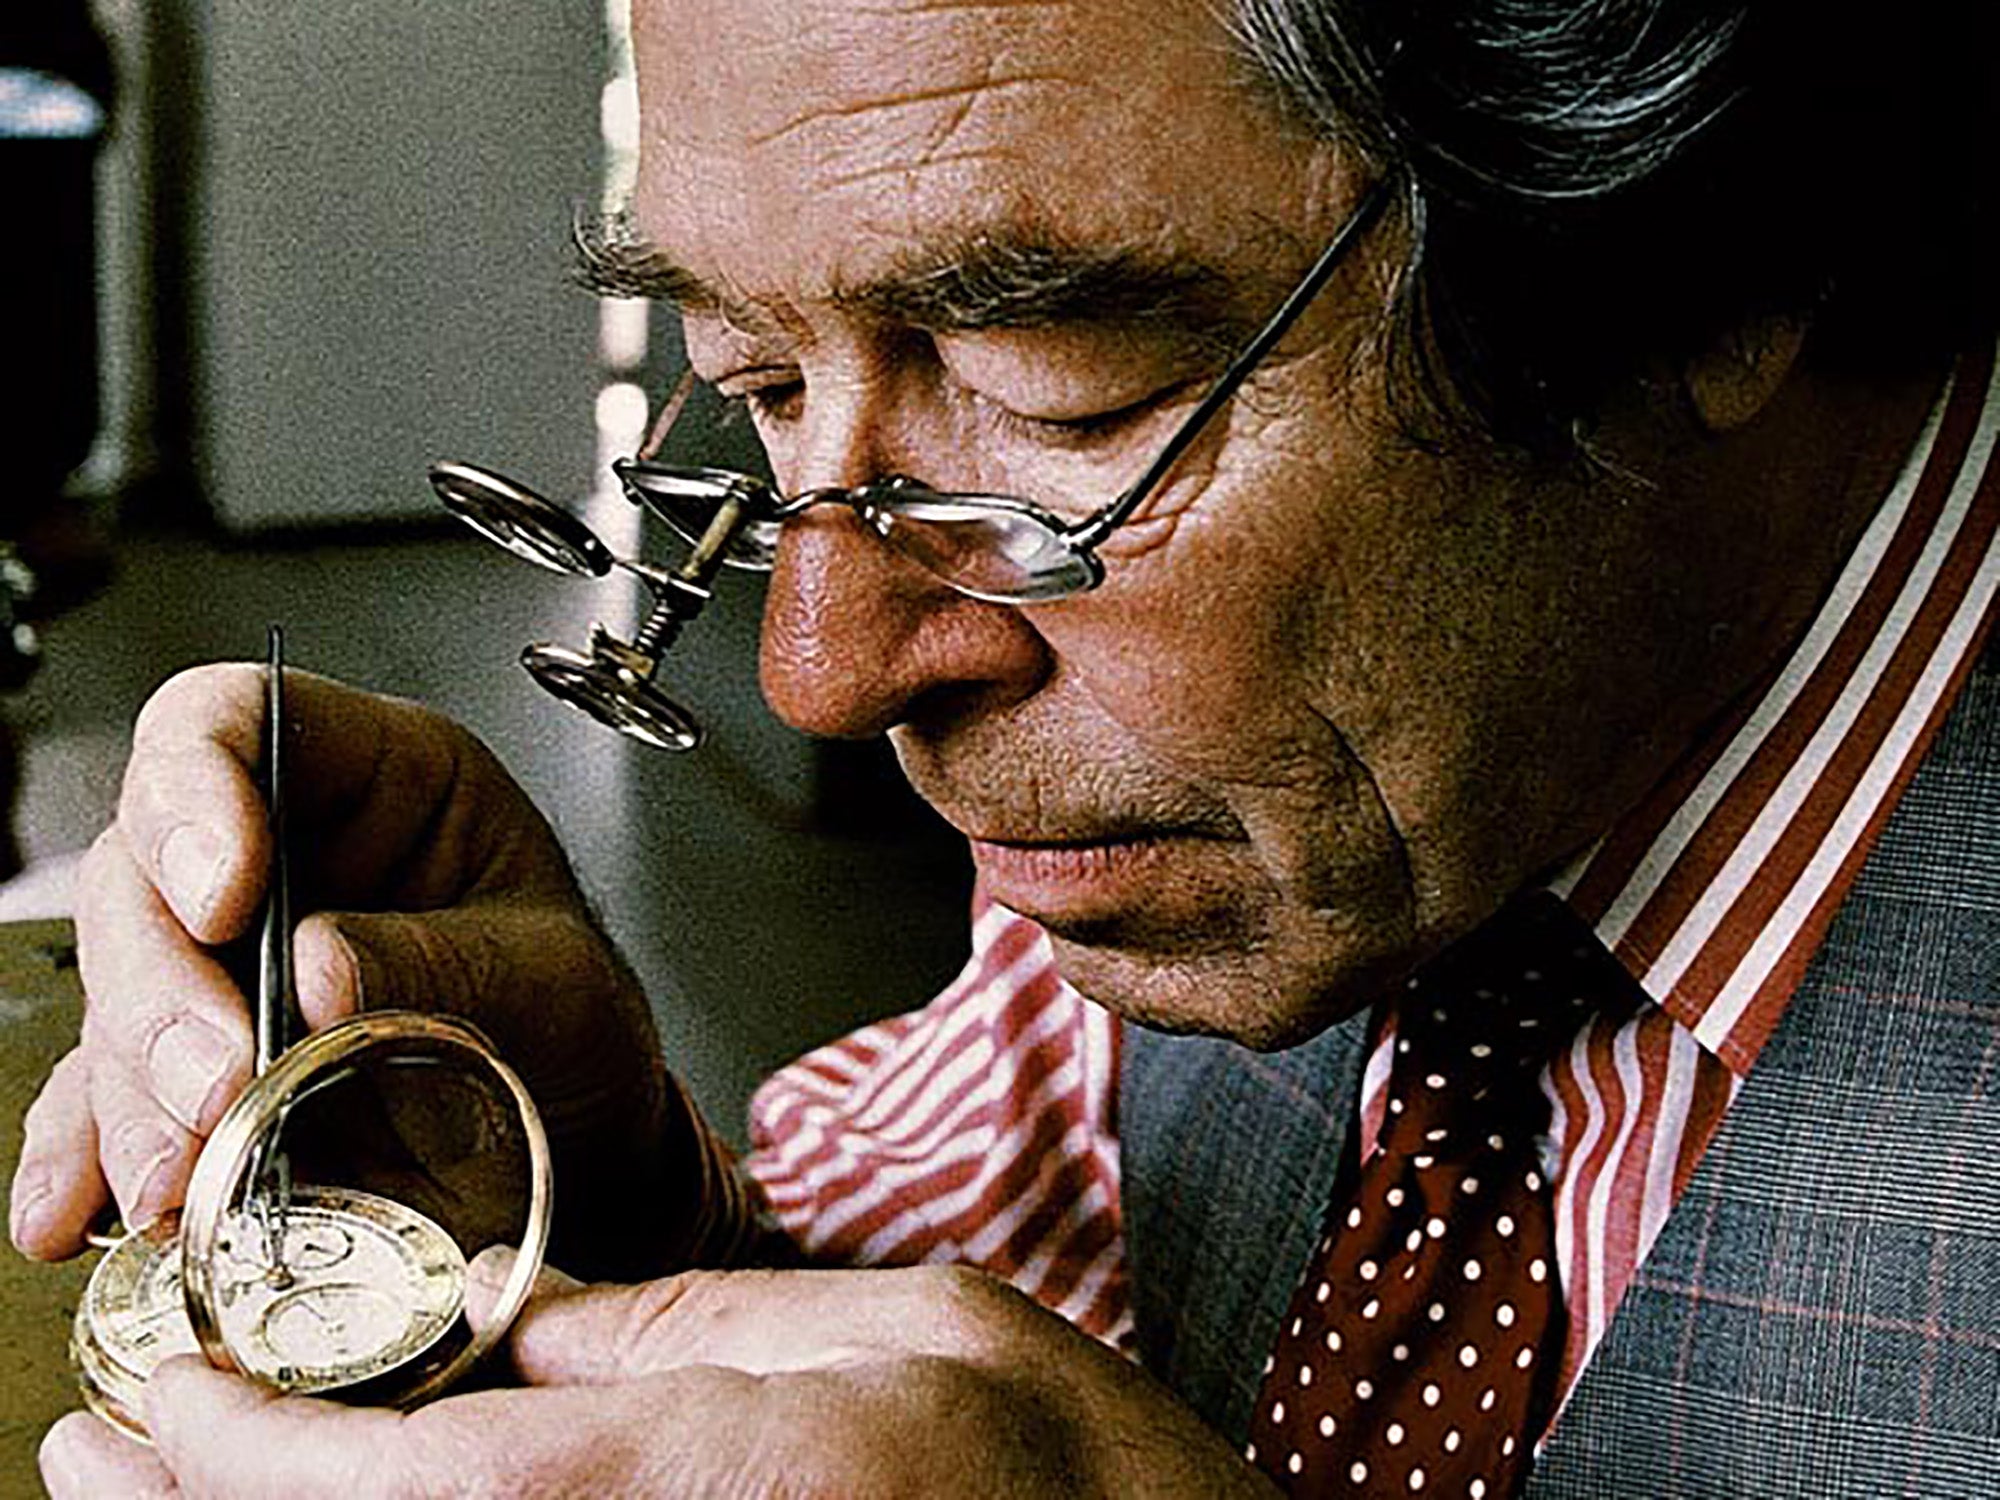 5-1999-george-daniels-inventor-of-the-co-axial-escapement